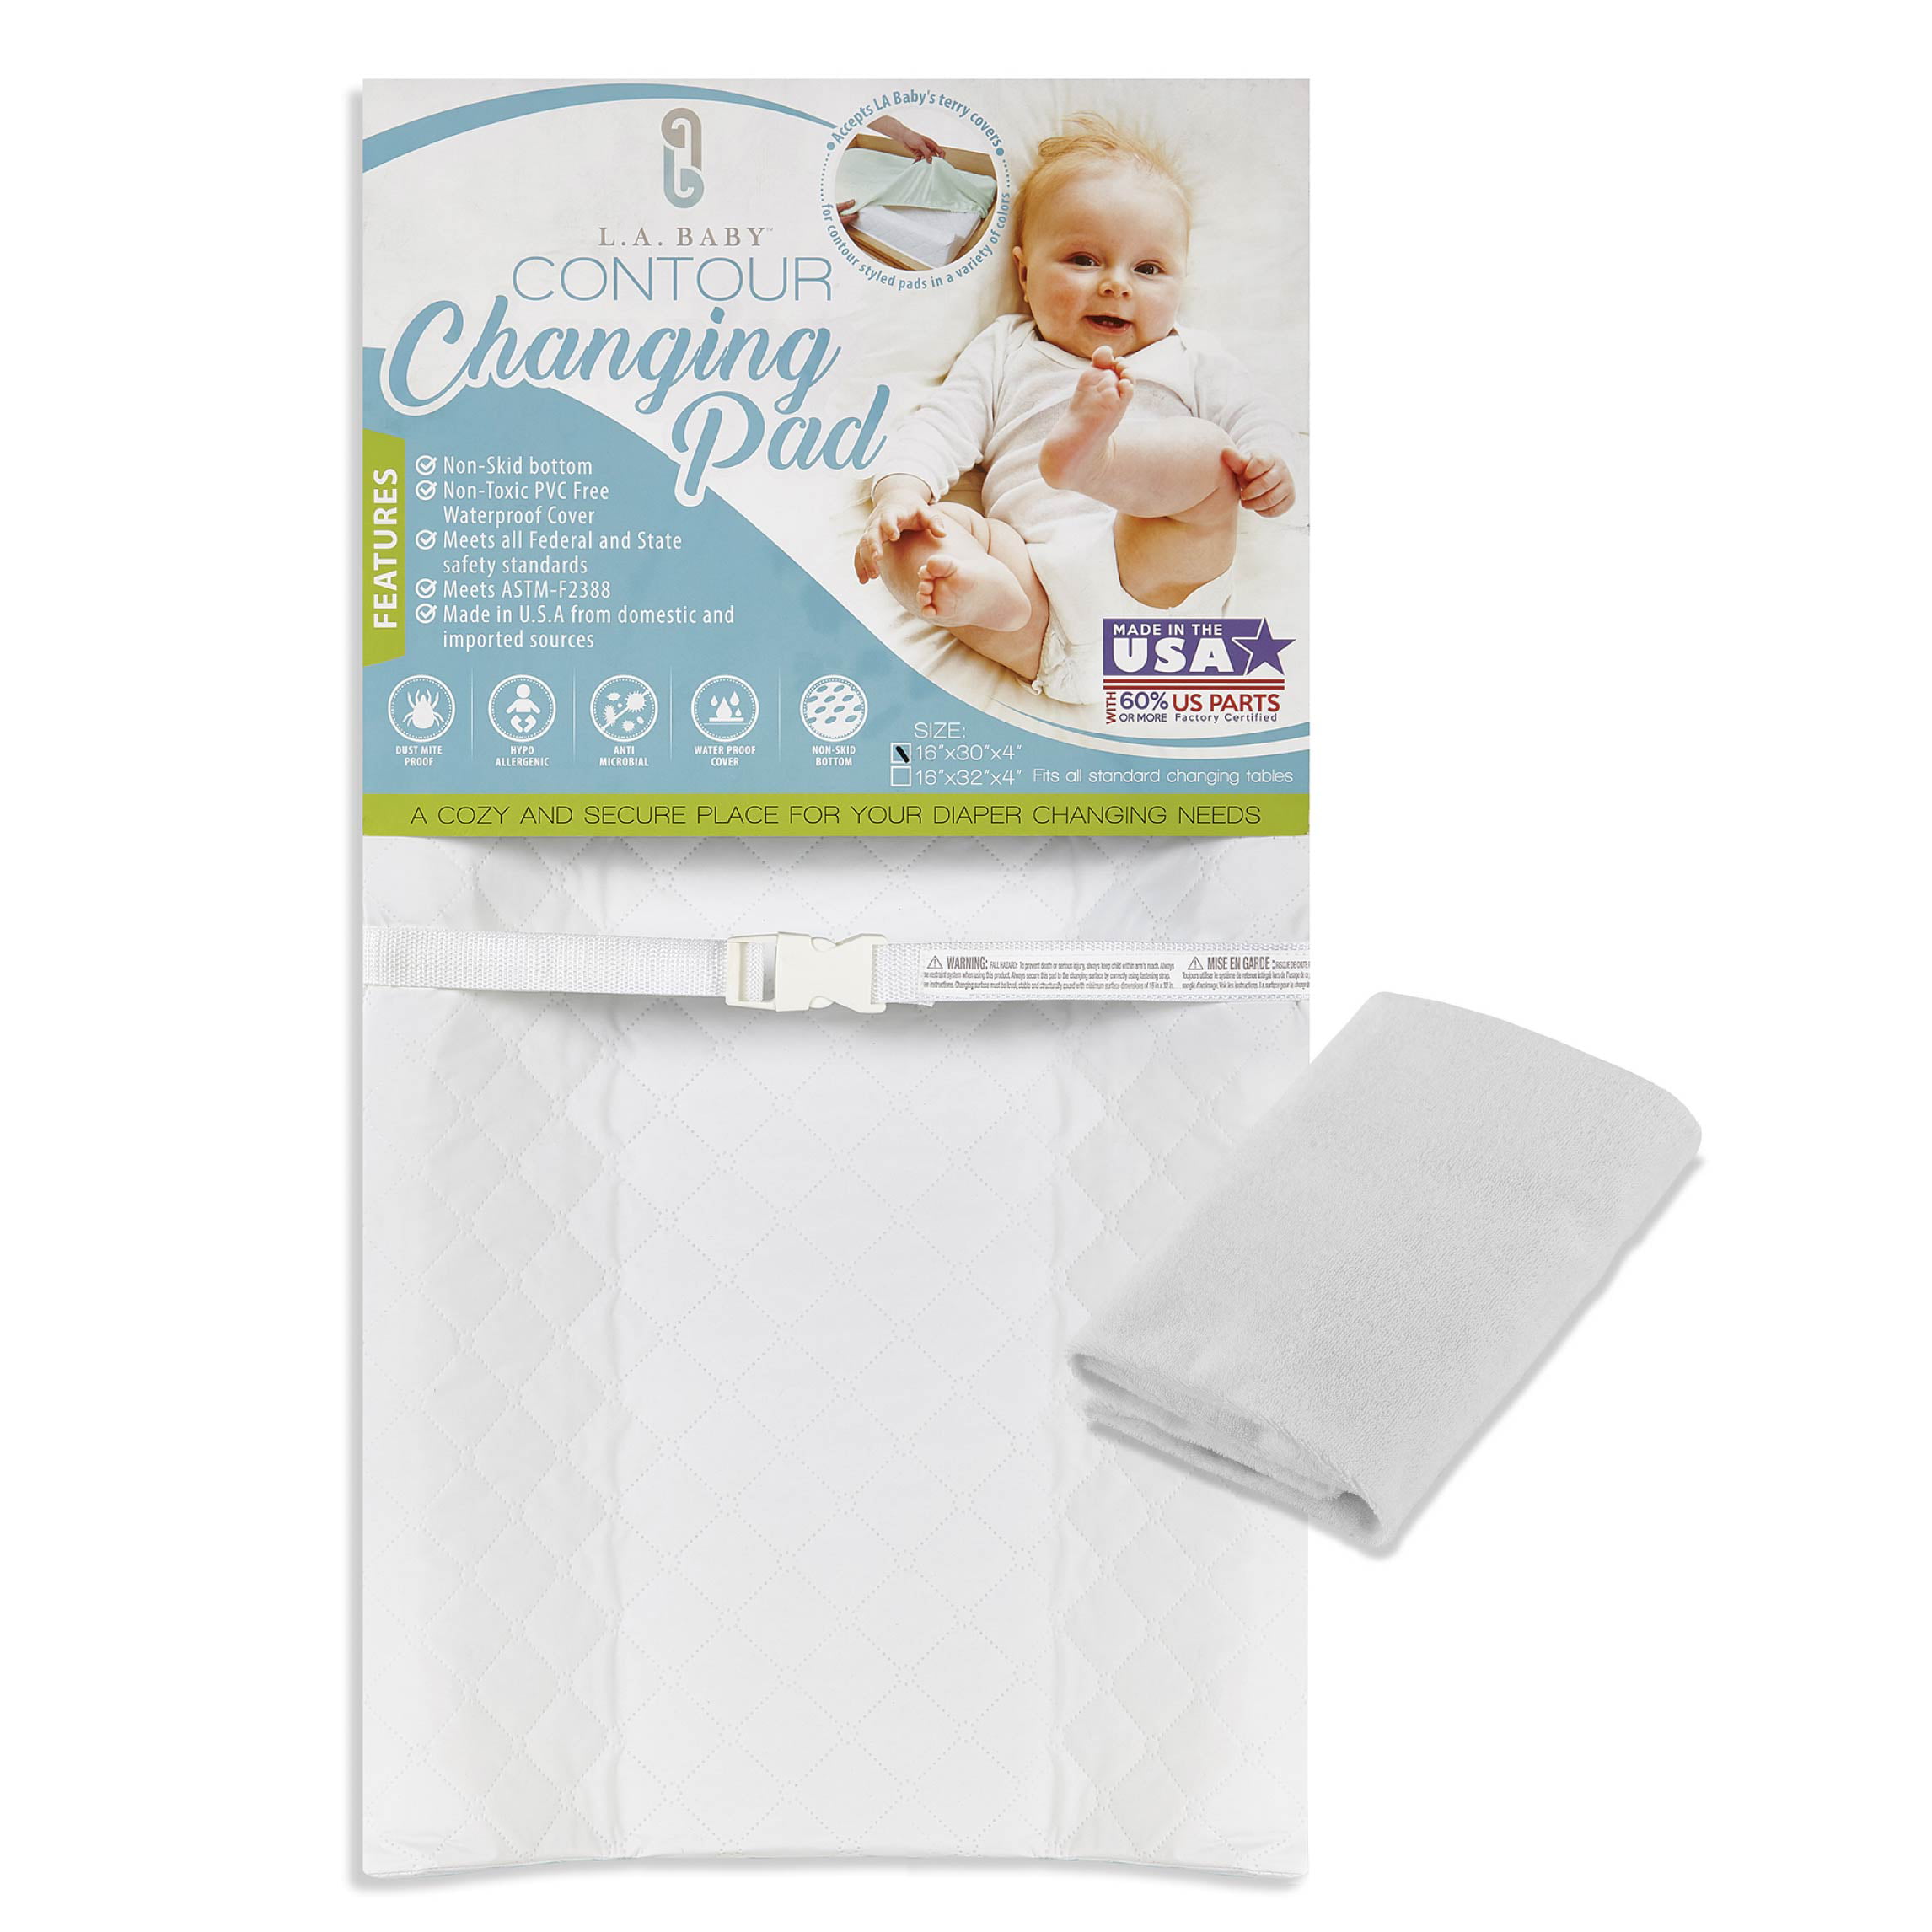 Little Prince Obaby Changing Mat